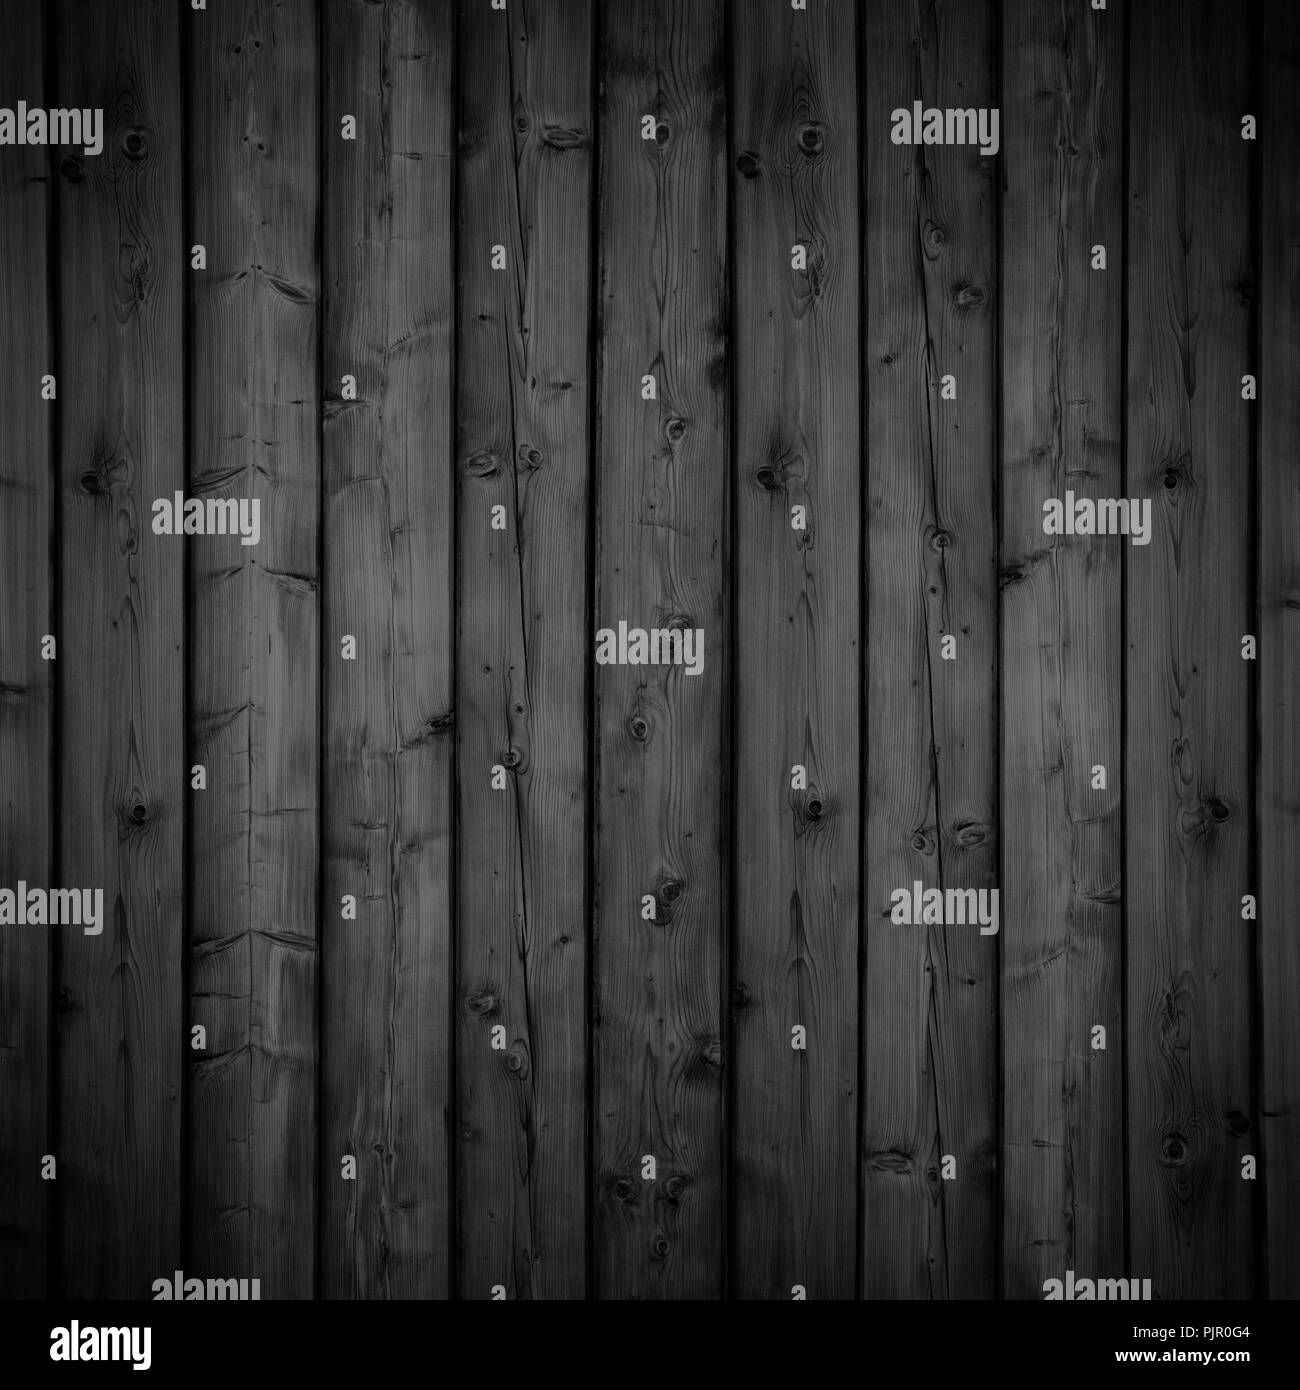 natural pattern wooden texture or black planks background Stock Photo